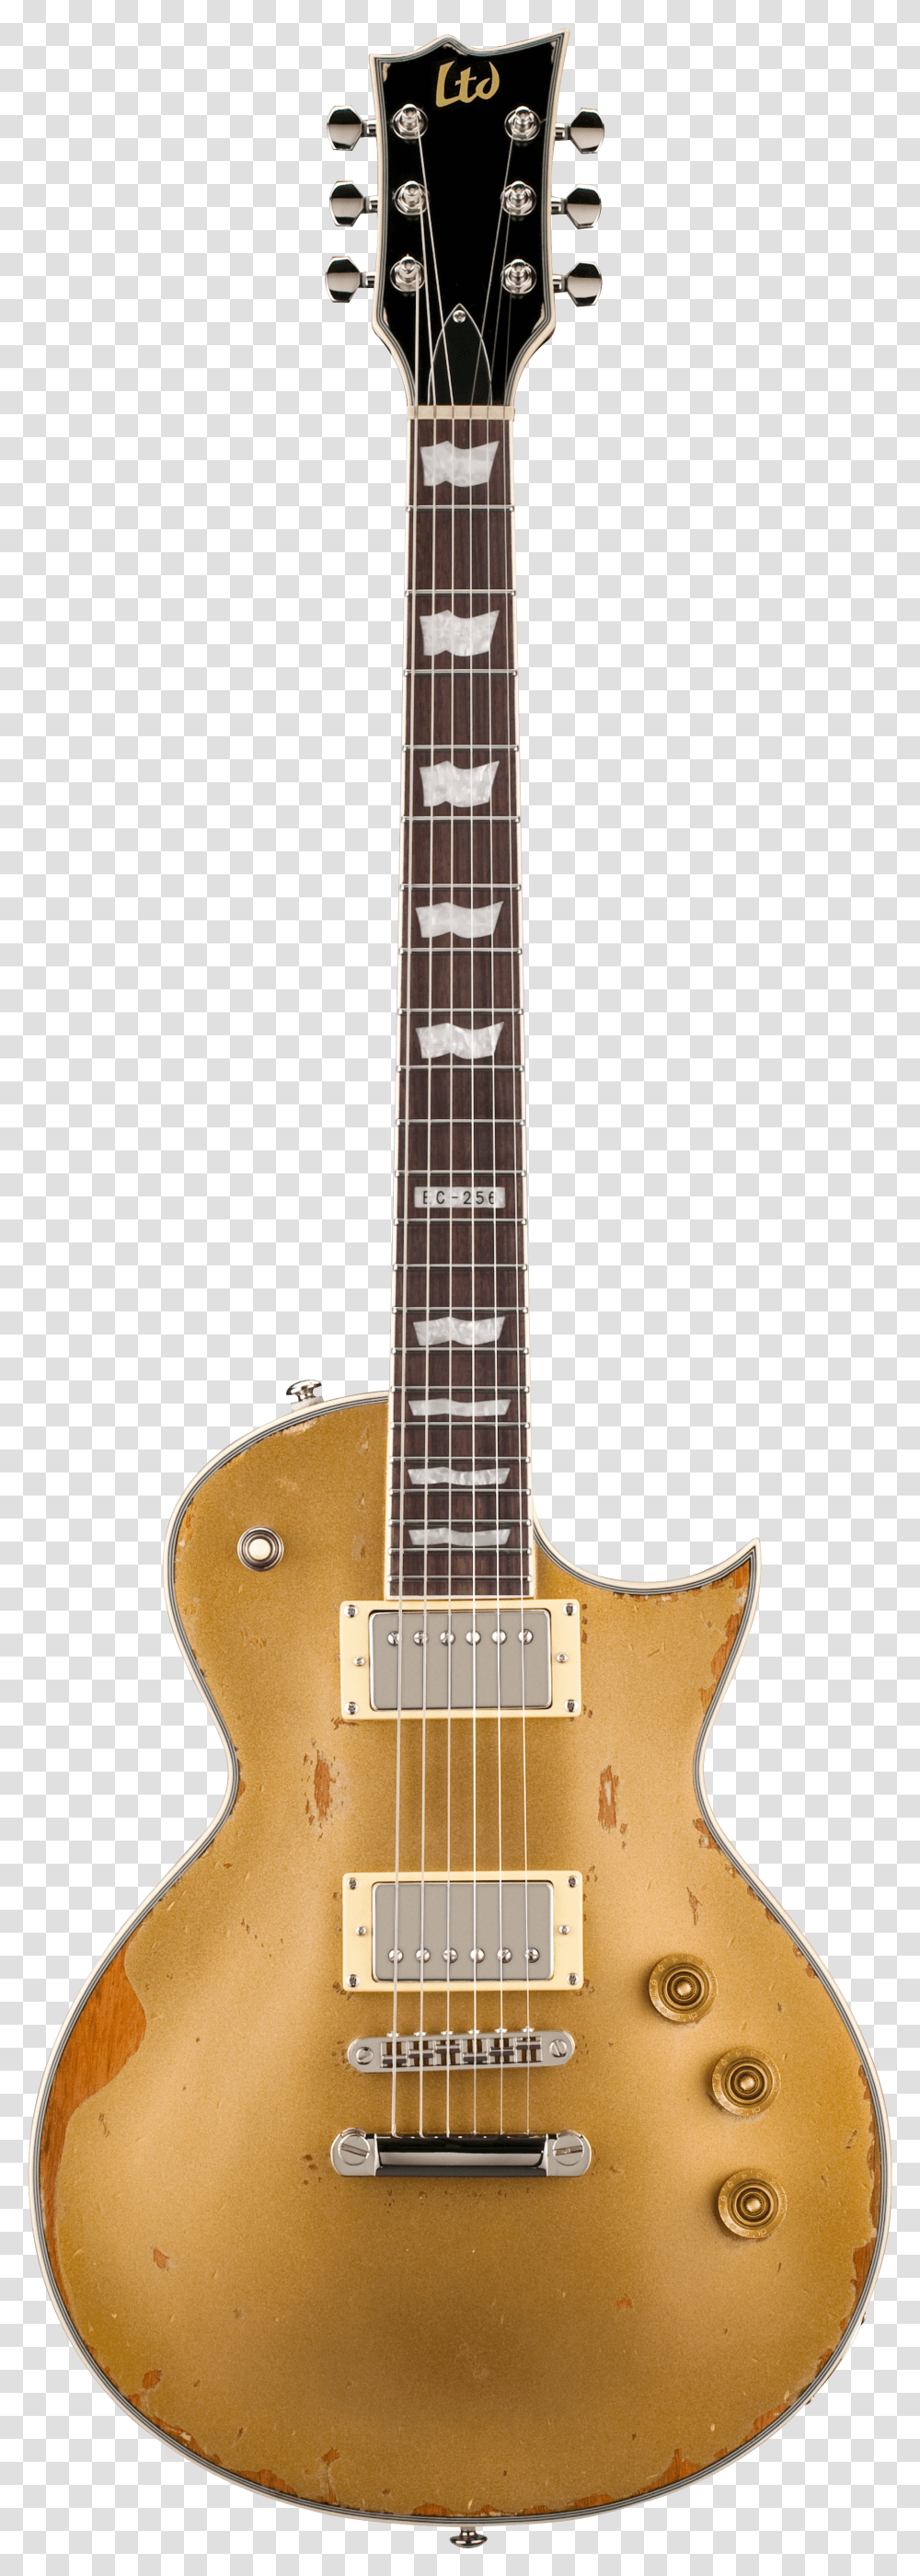 Guitar Images Free Picture Download Gold Electric Guitar Transparent Png